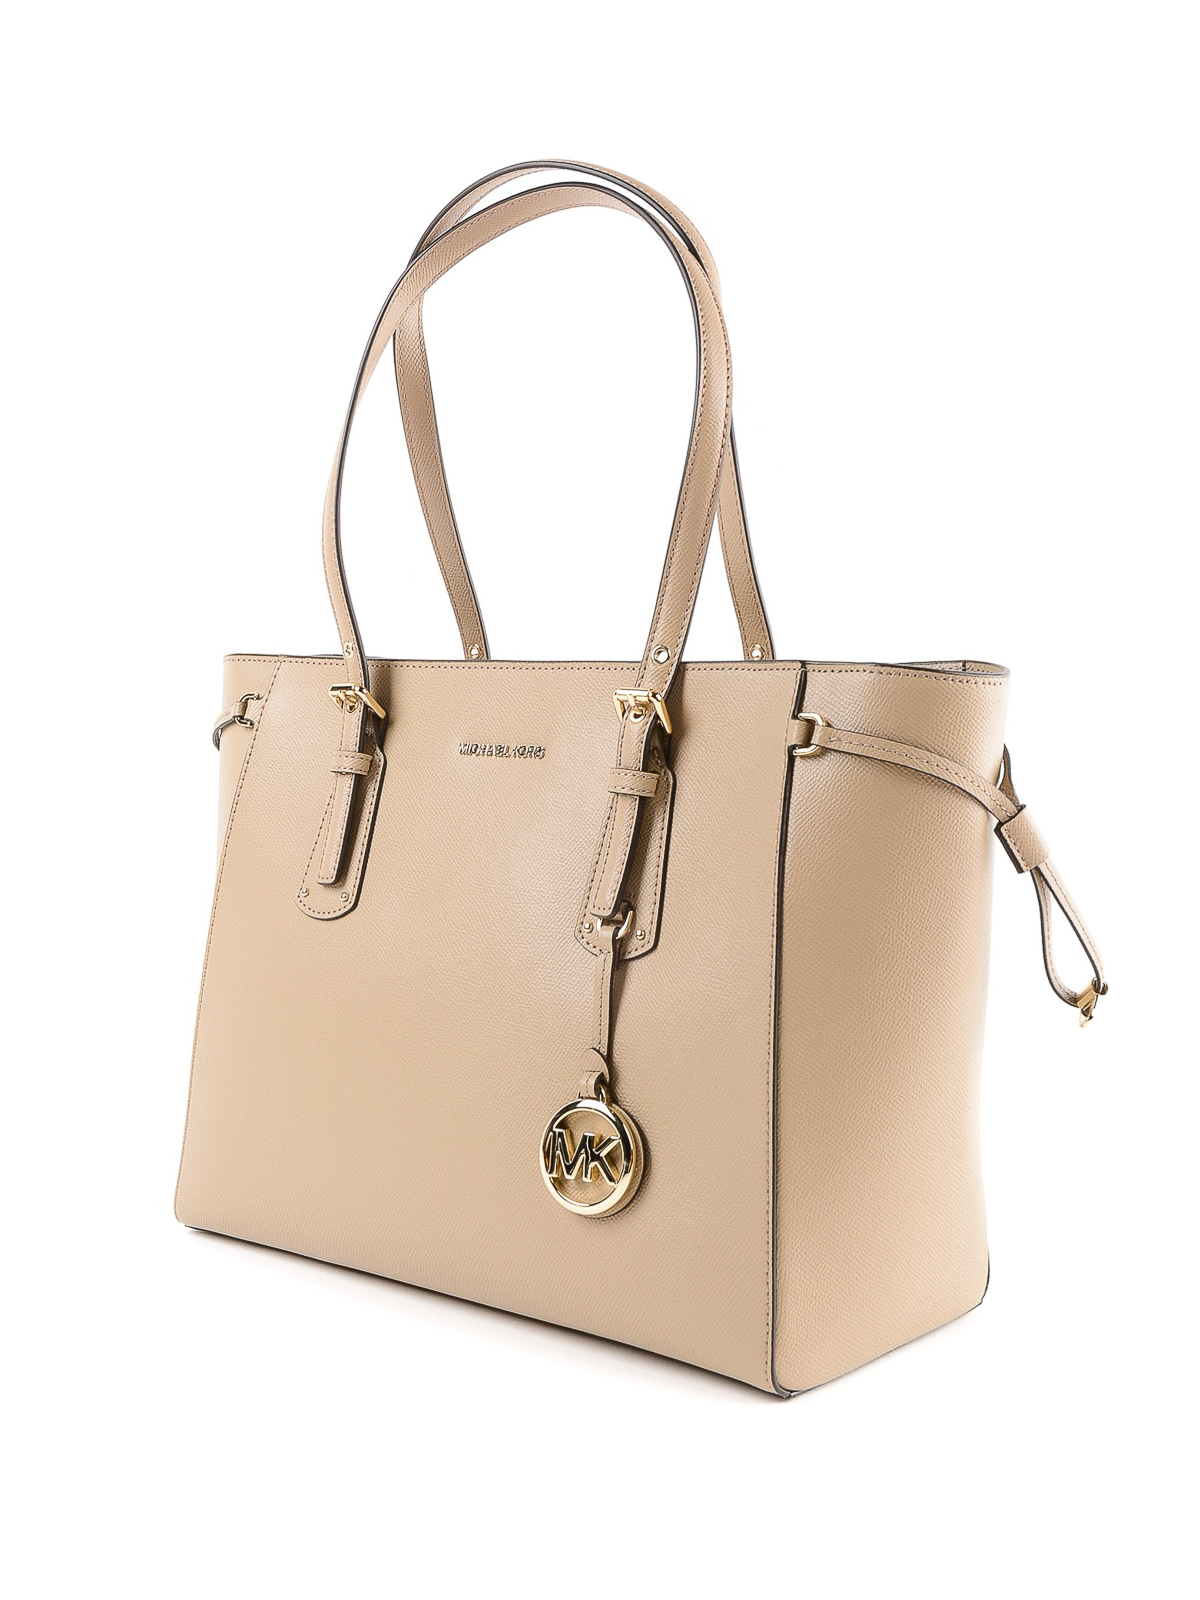 Michael Kors Voyager Leather Tote Bag